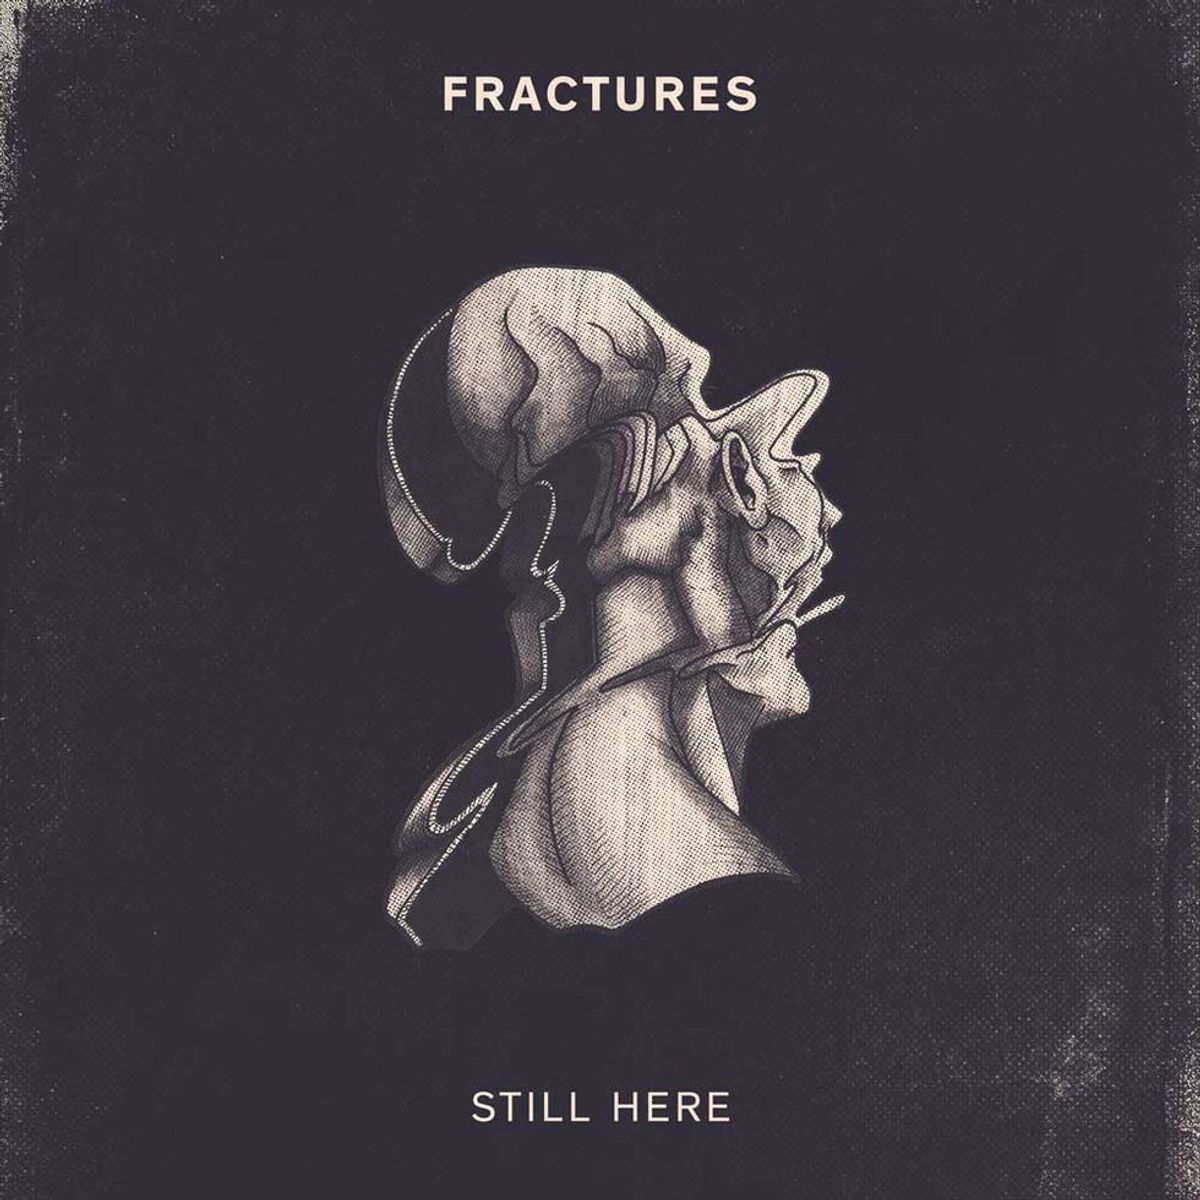 "Still Here" By Fractures